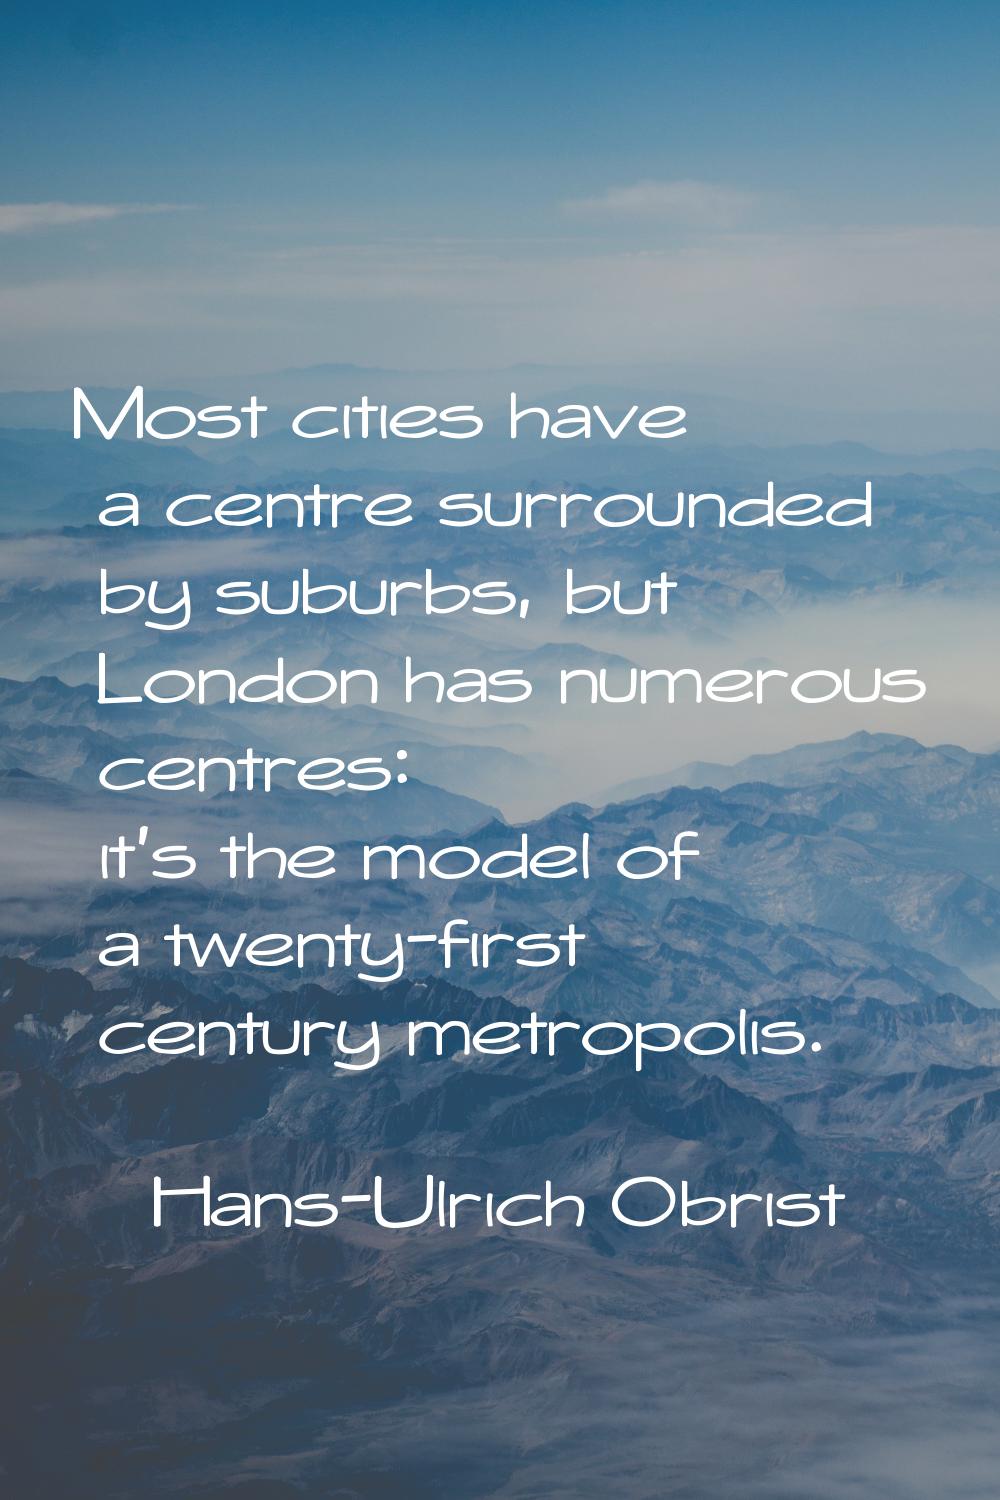 Most cities have a centre surrounded by suburbs, but London has numerous centres: it's the model of